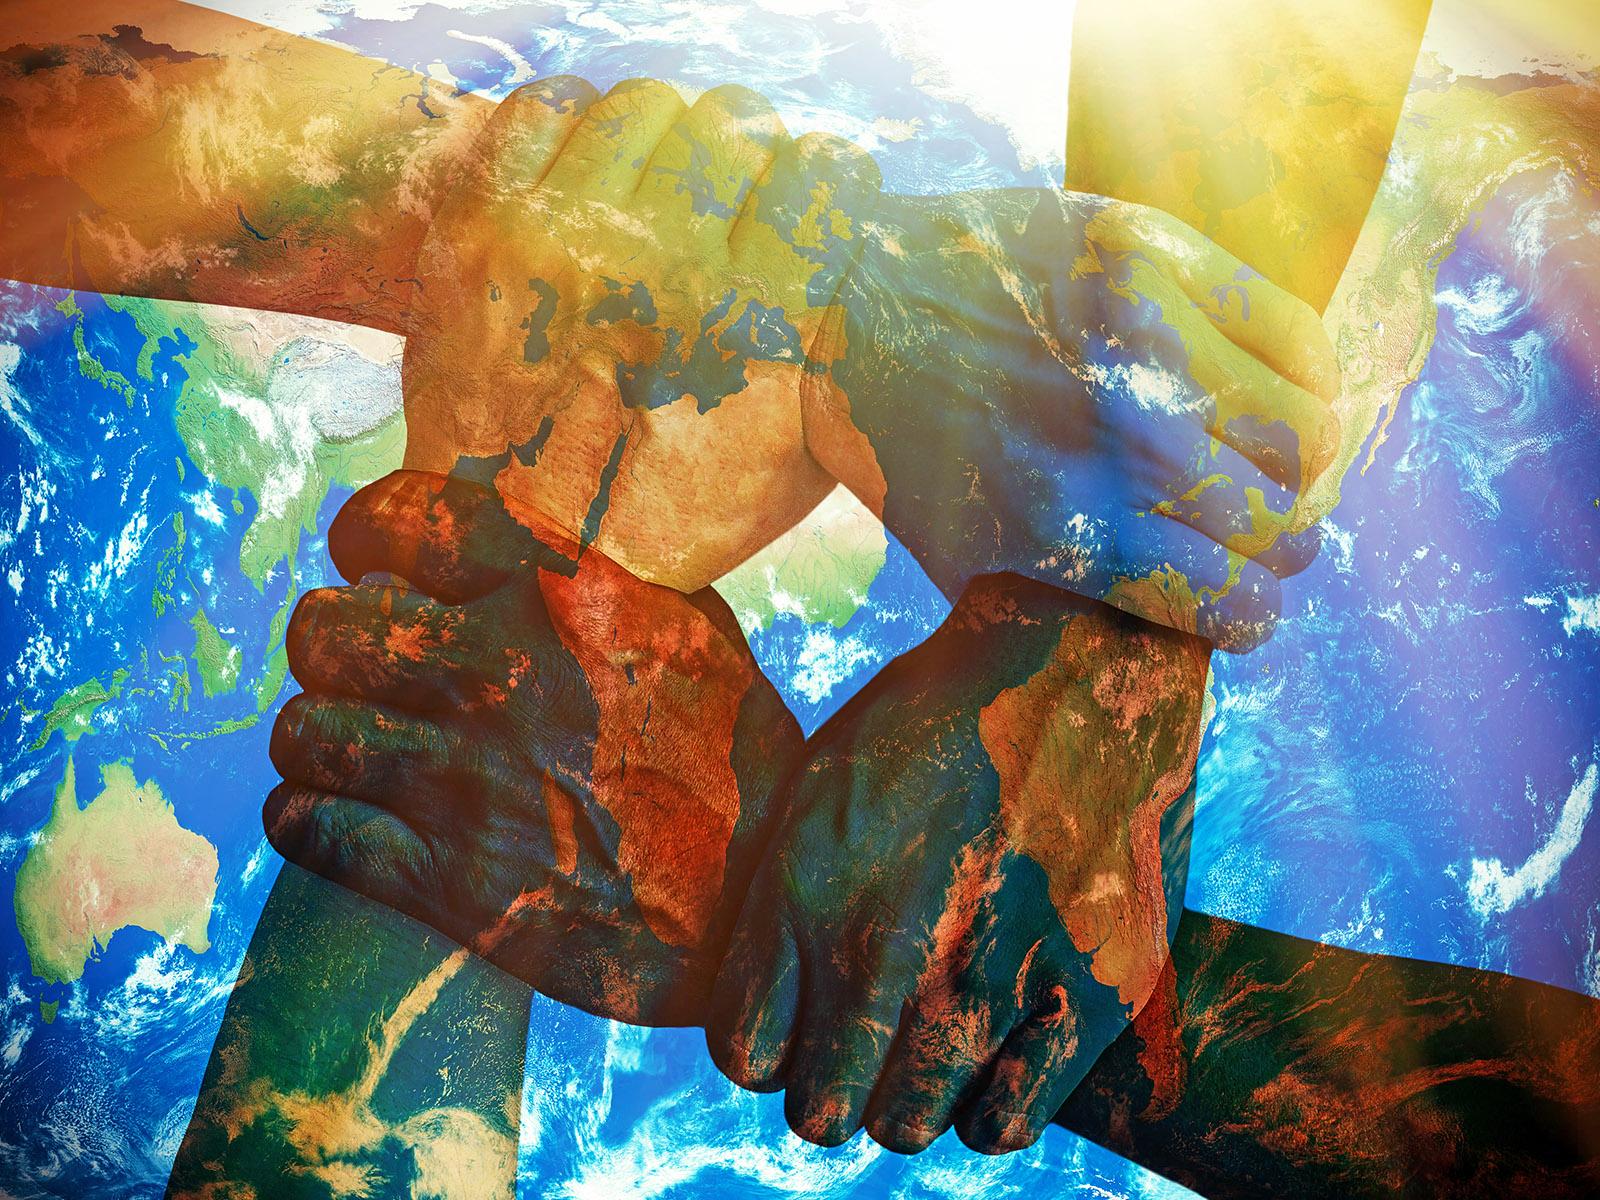 An illustration showing hands representing multiple human races united over the earth.